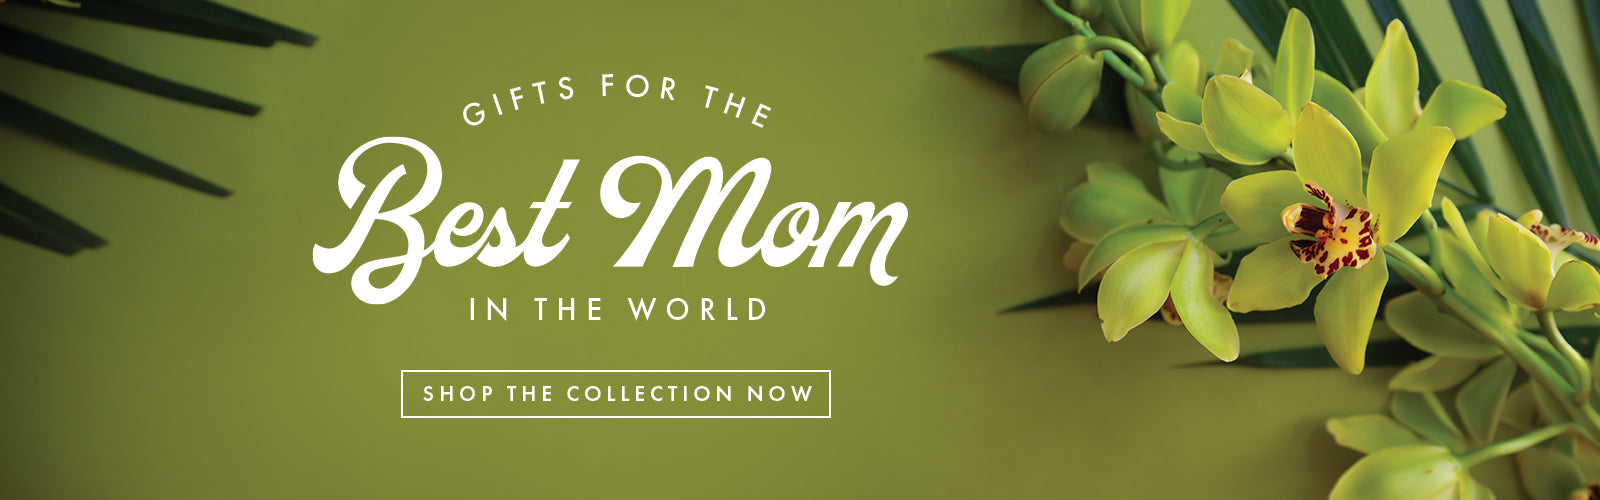 gifts for the best mom in the world. shop the collection now. green tropical flowers and leaves site on a green background.